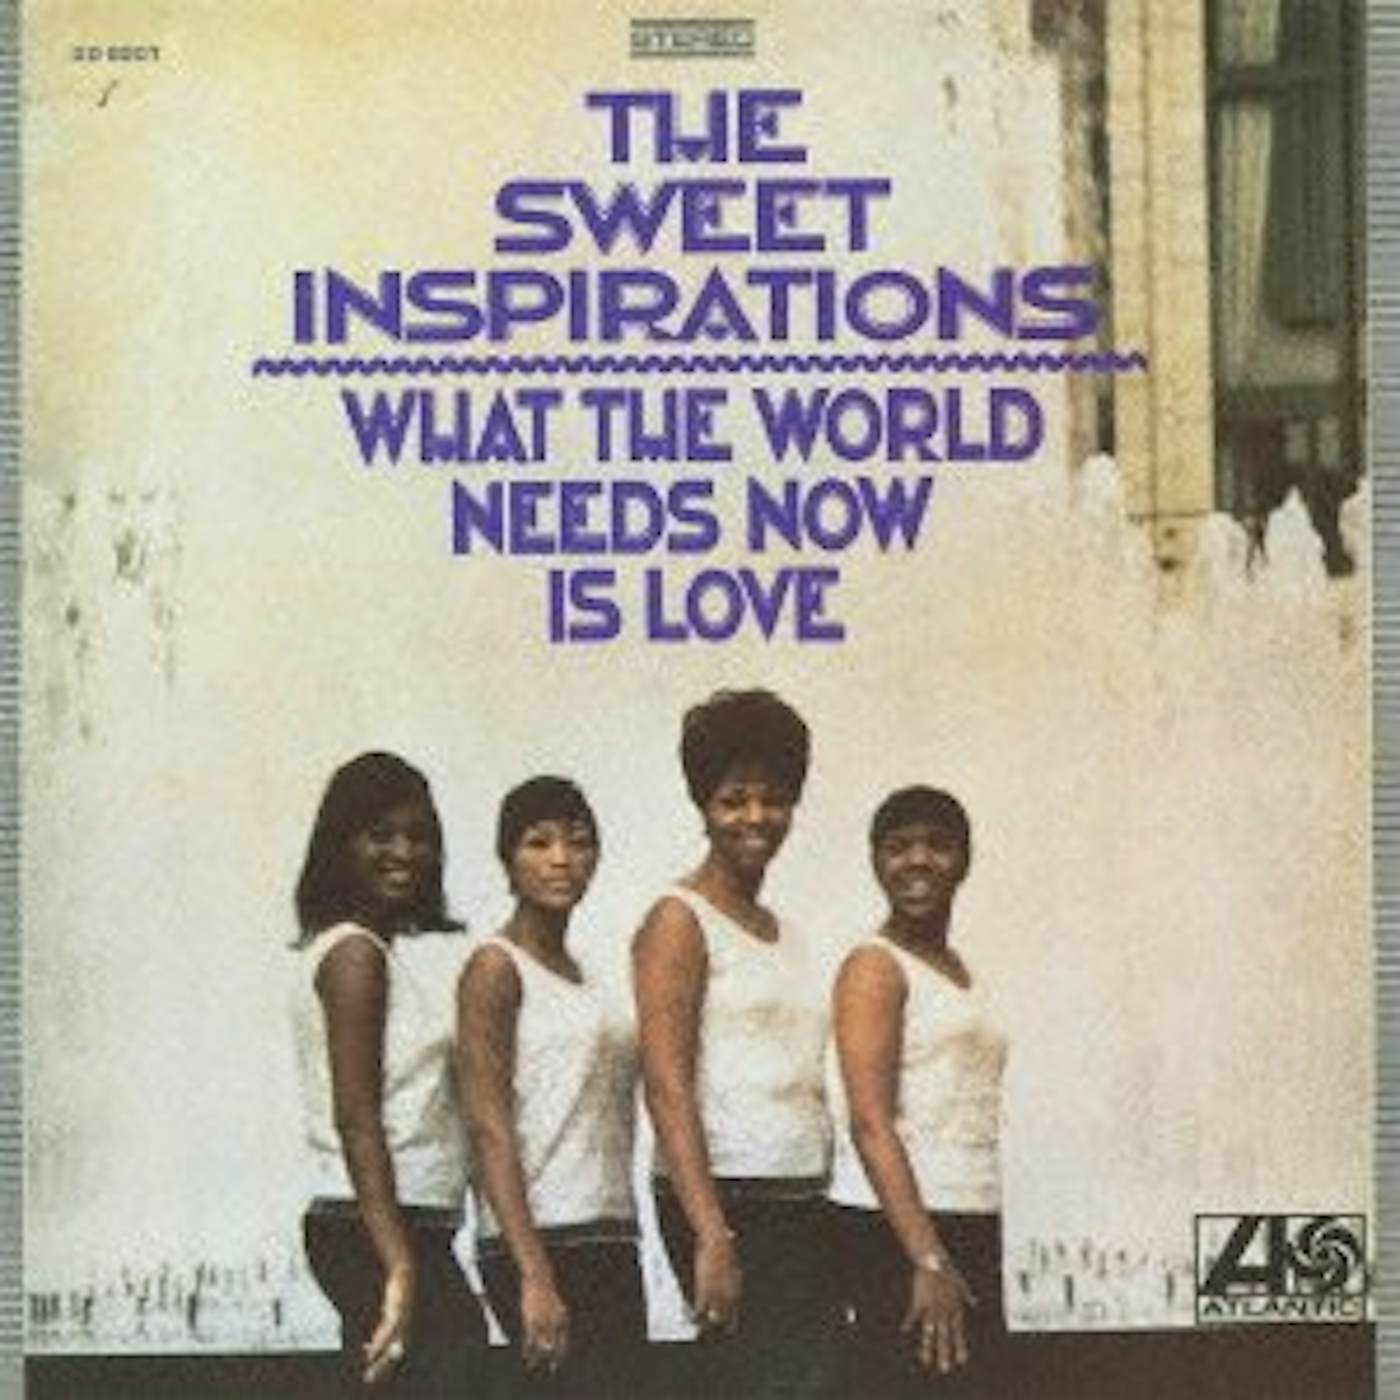 The Sweet Inspirations WHAT THE WORLD NEEDS NOW CD